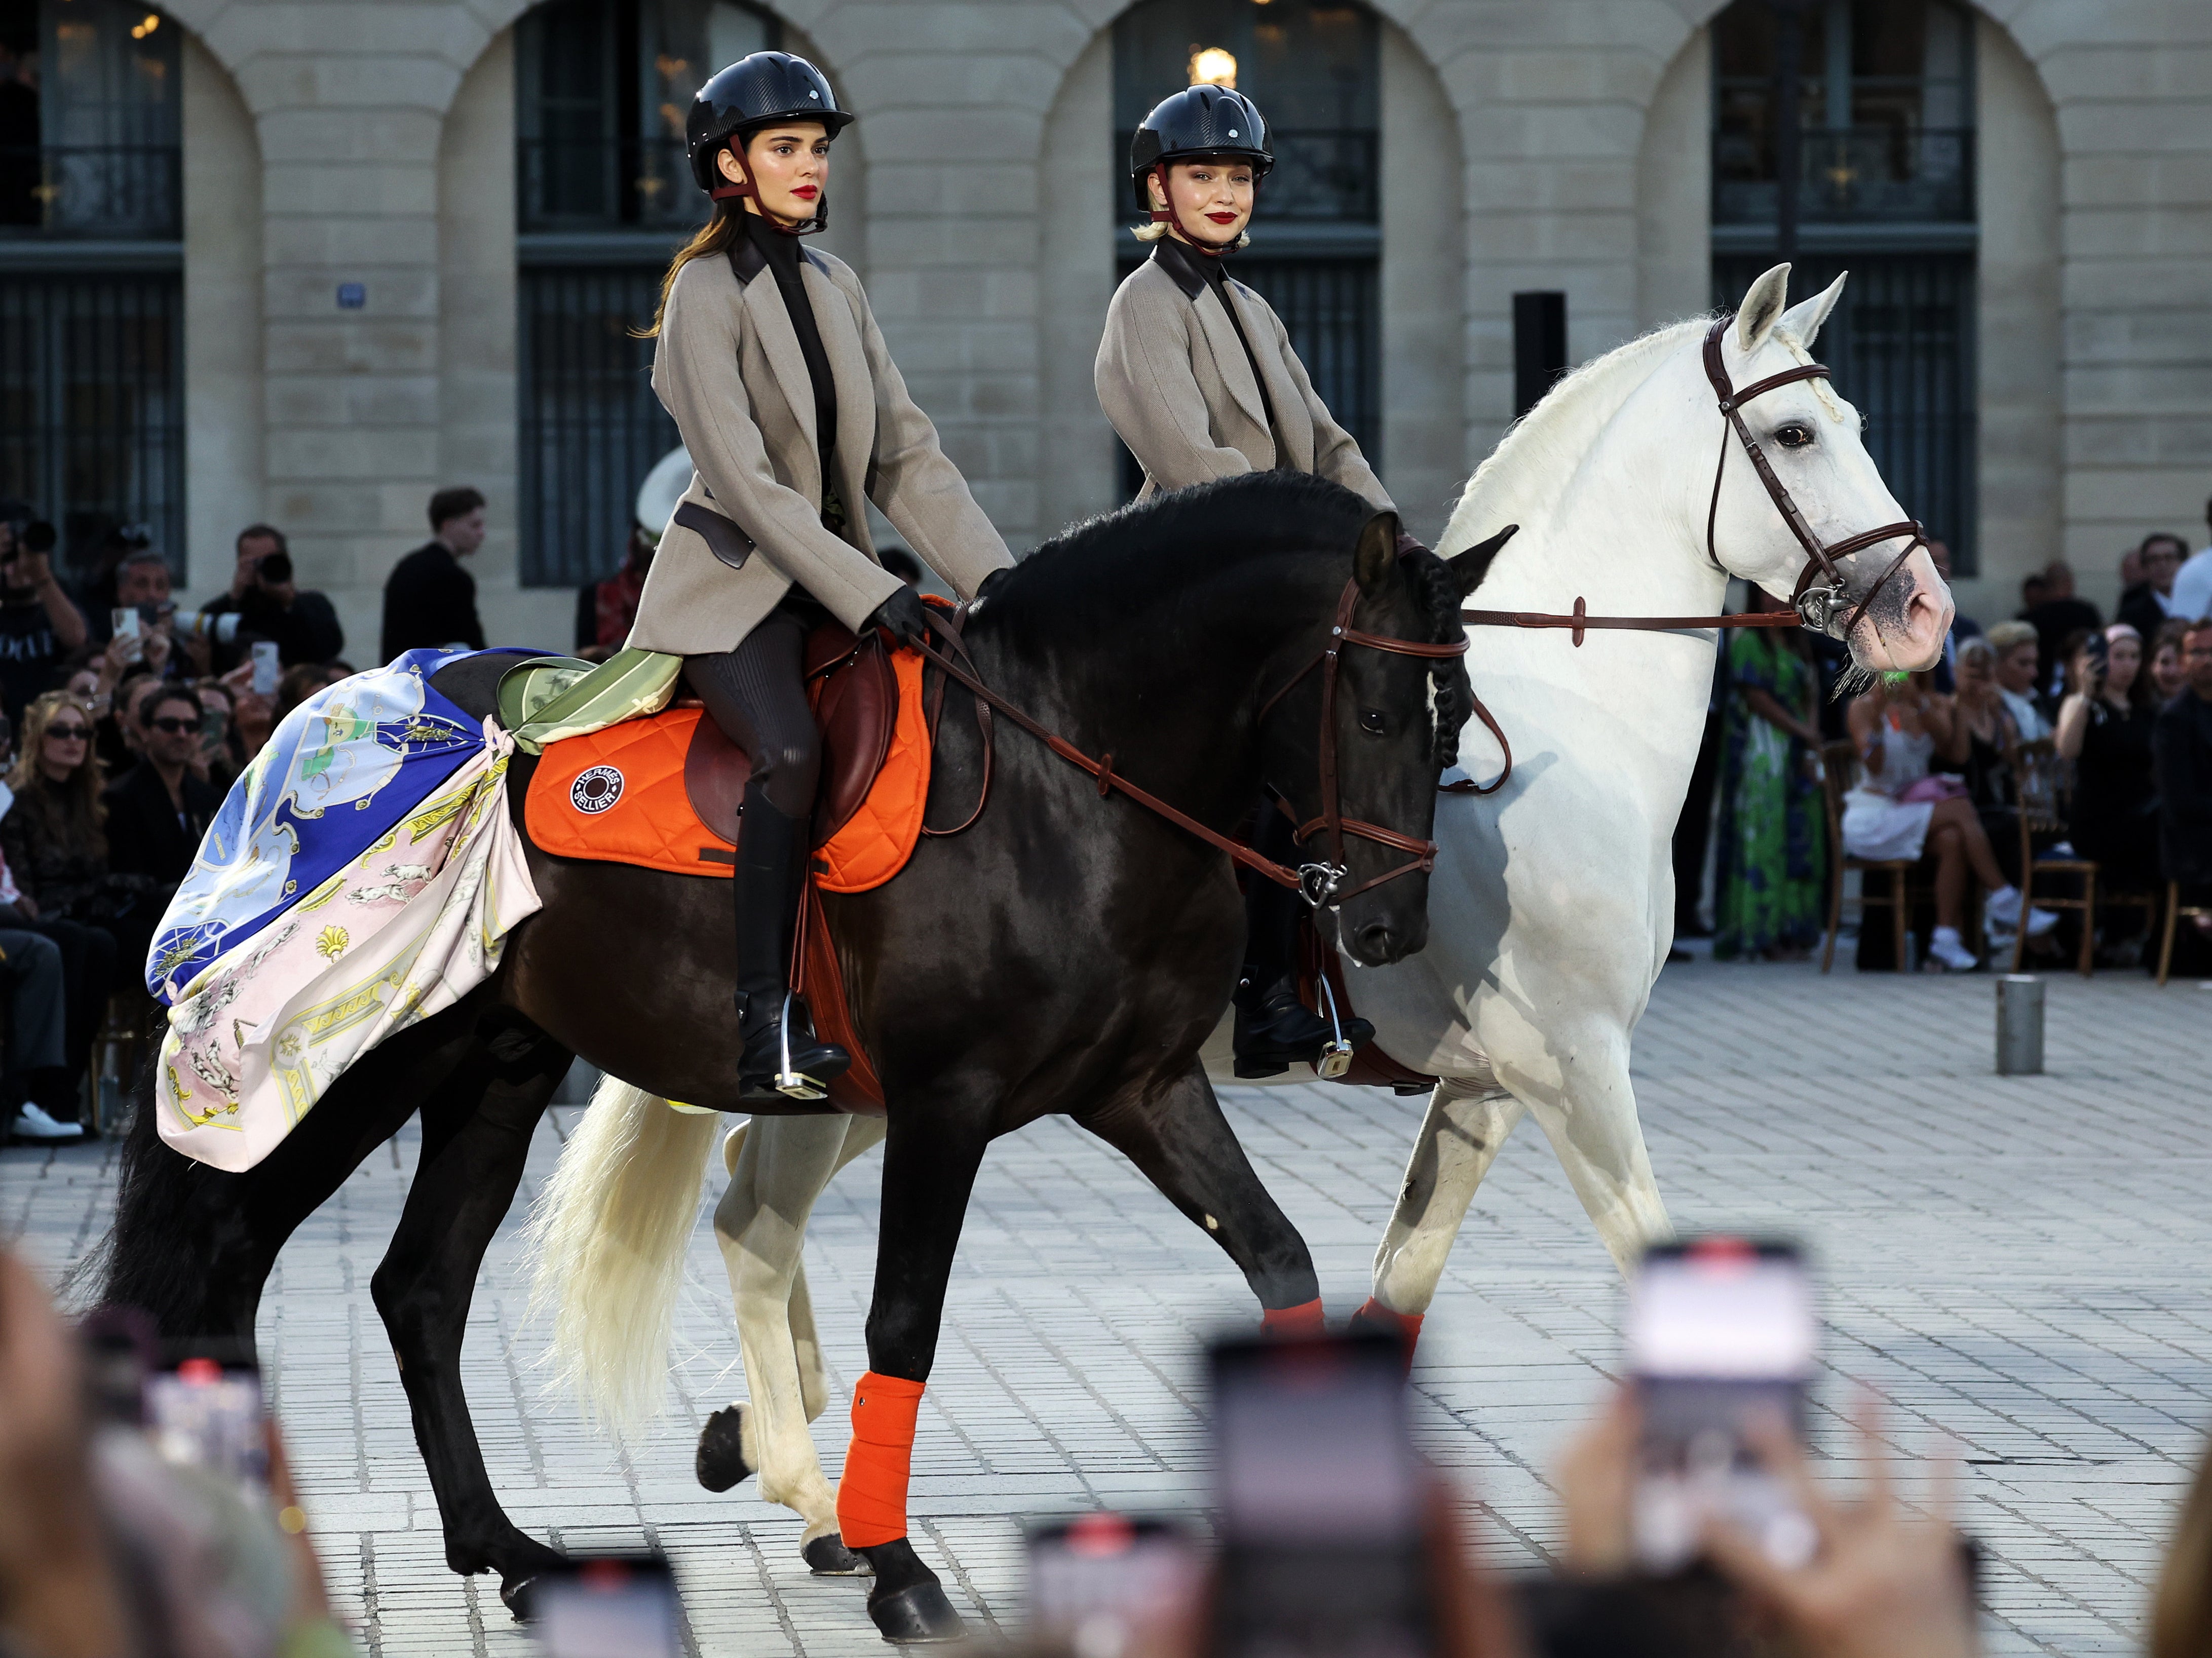 Kendall Jenner and Gigi Hadid arrived at the runway of the Vogue World: Paris show on horses on 23 June